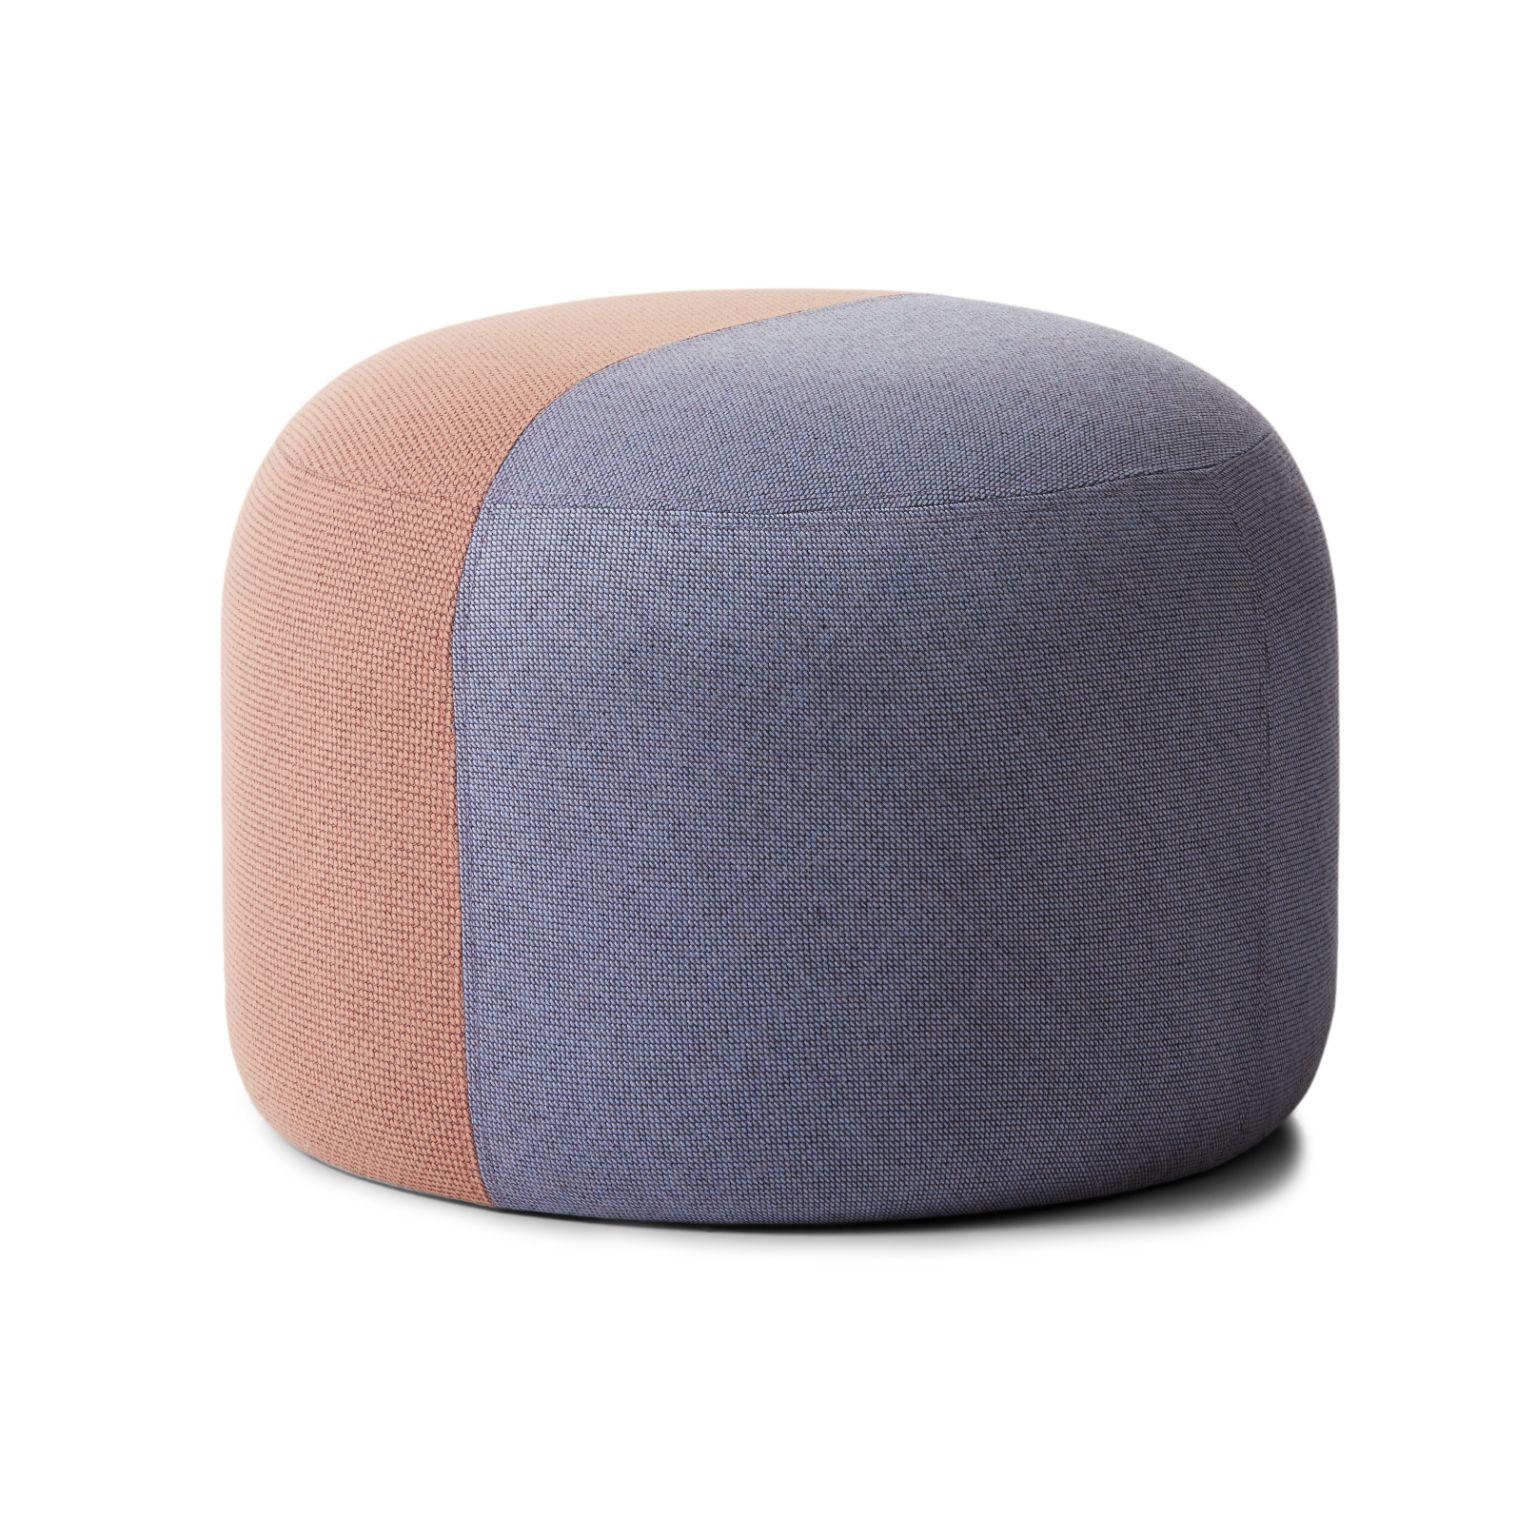 Dainty pouf fresh peach soft violet by Warm Nordic
Dimensions: D55 x H 39 cm
Material: Textile upholstery, Wooden frame, foam.
Weight: 9.5 kg
Also available in different colors and finishes.

Sophisticated, two-coloured pouf with soft shapes and a